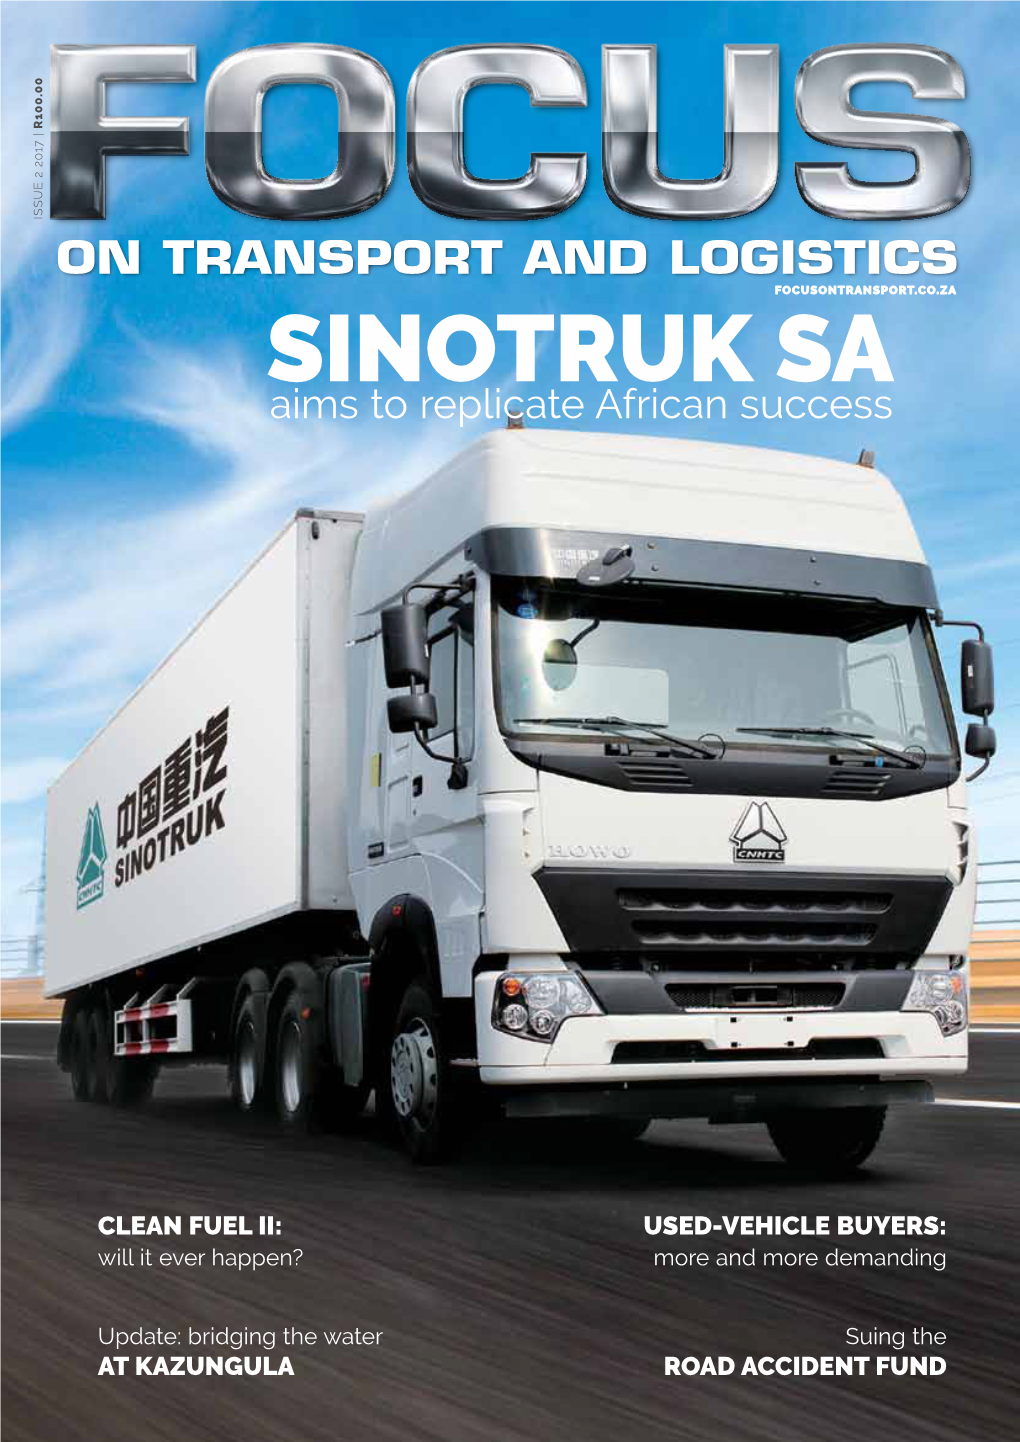 Sinotruk SA Aims to Replicate African Success